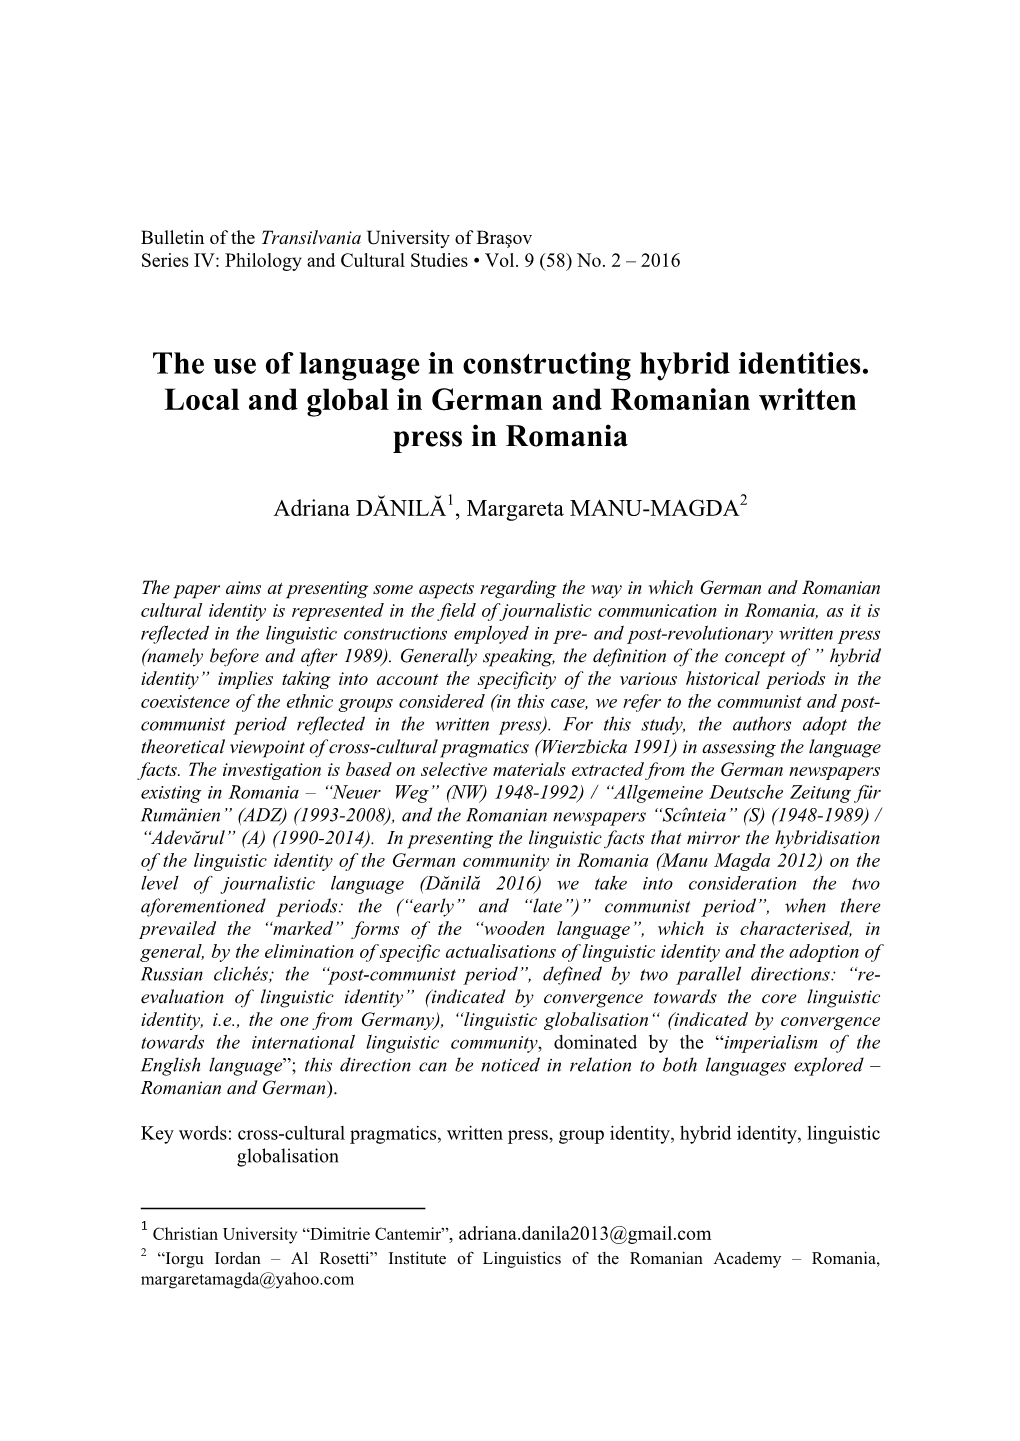 The Use of Language in Constructing Hybrid Identities. Local and Global in German and Romanian Written Press in Romania